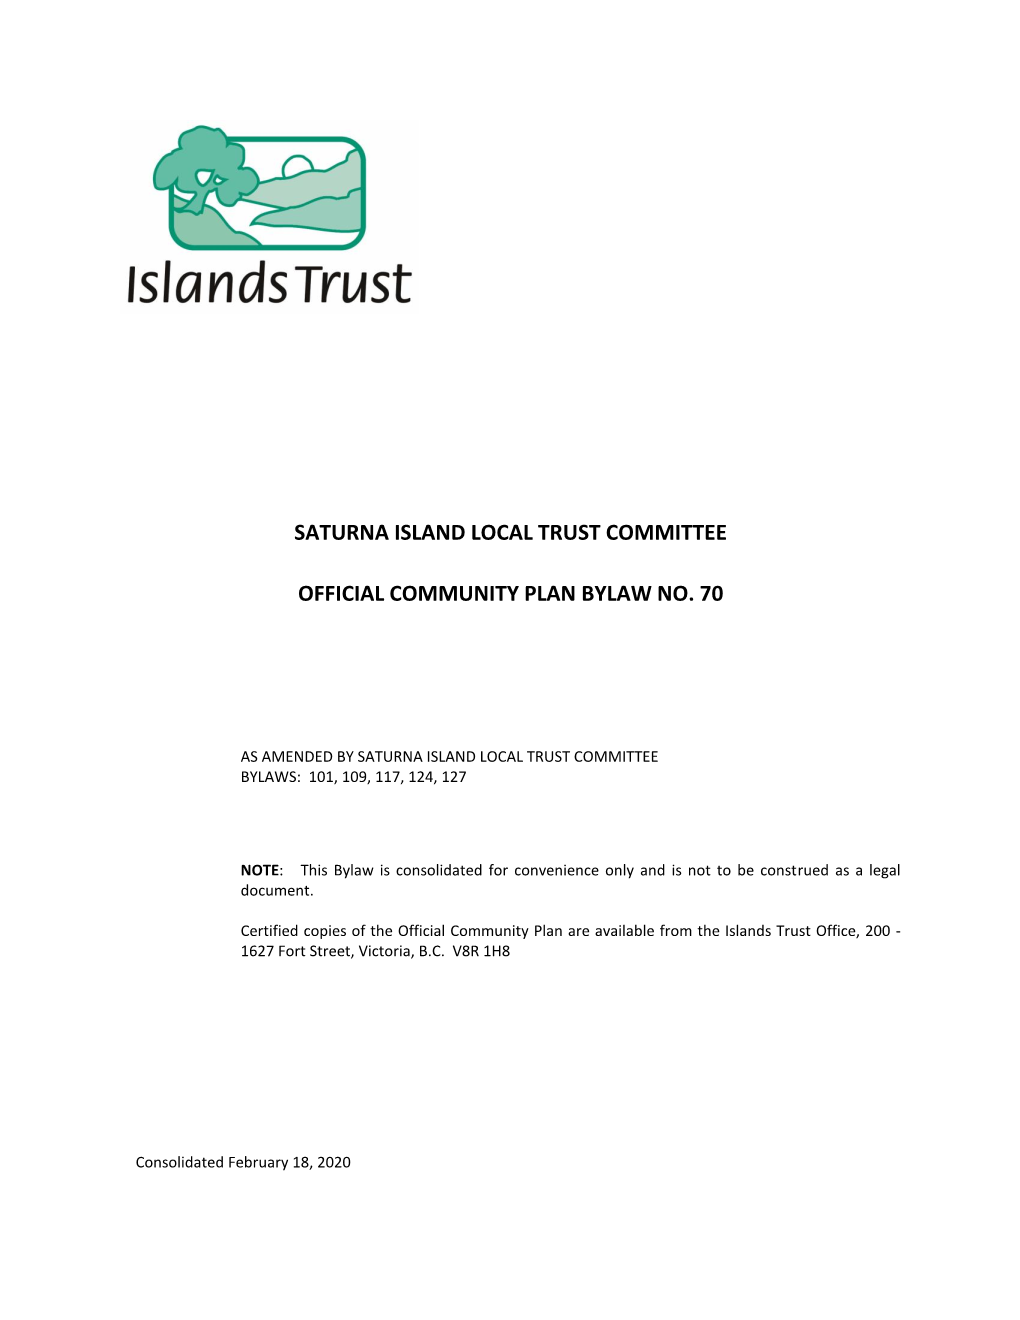 Saturna Island Local Trust Committee Official